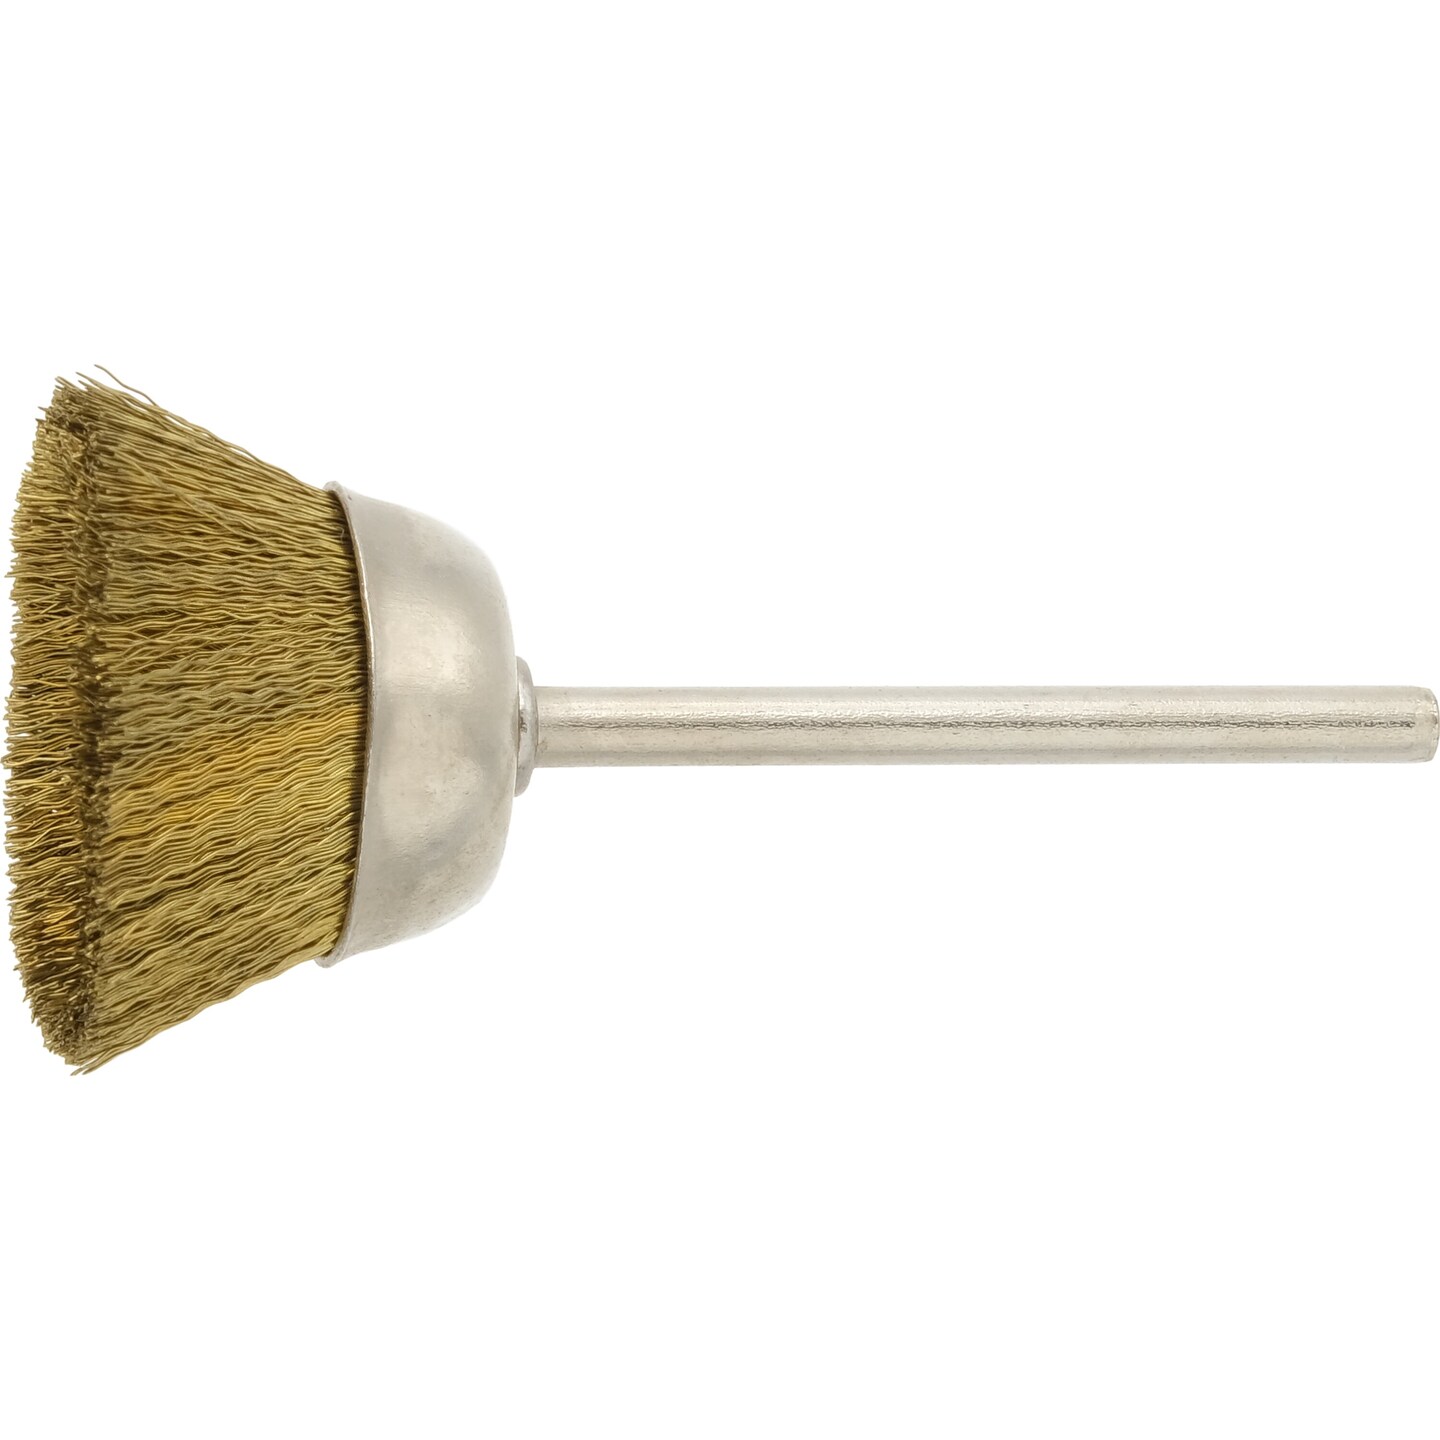 Brass Wire Cup Brush for Cleaning Rust Removal Dia: 1 CMB100